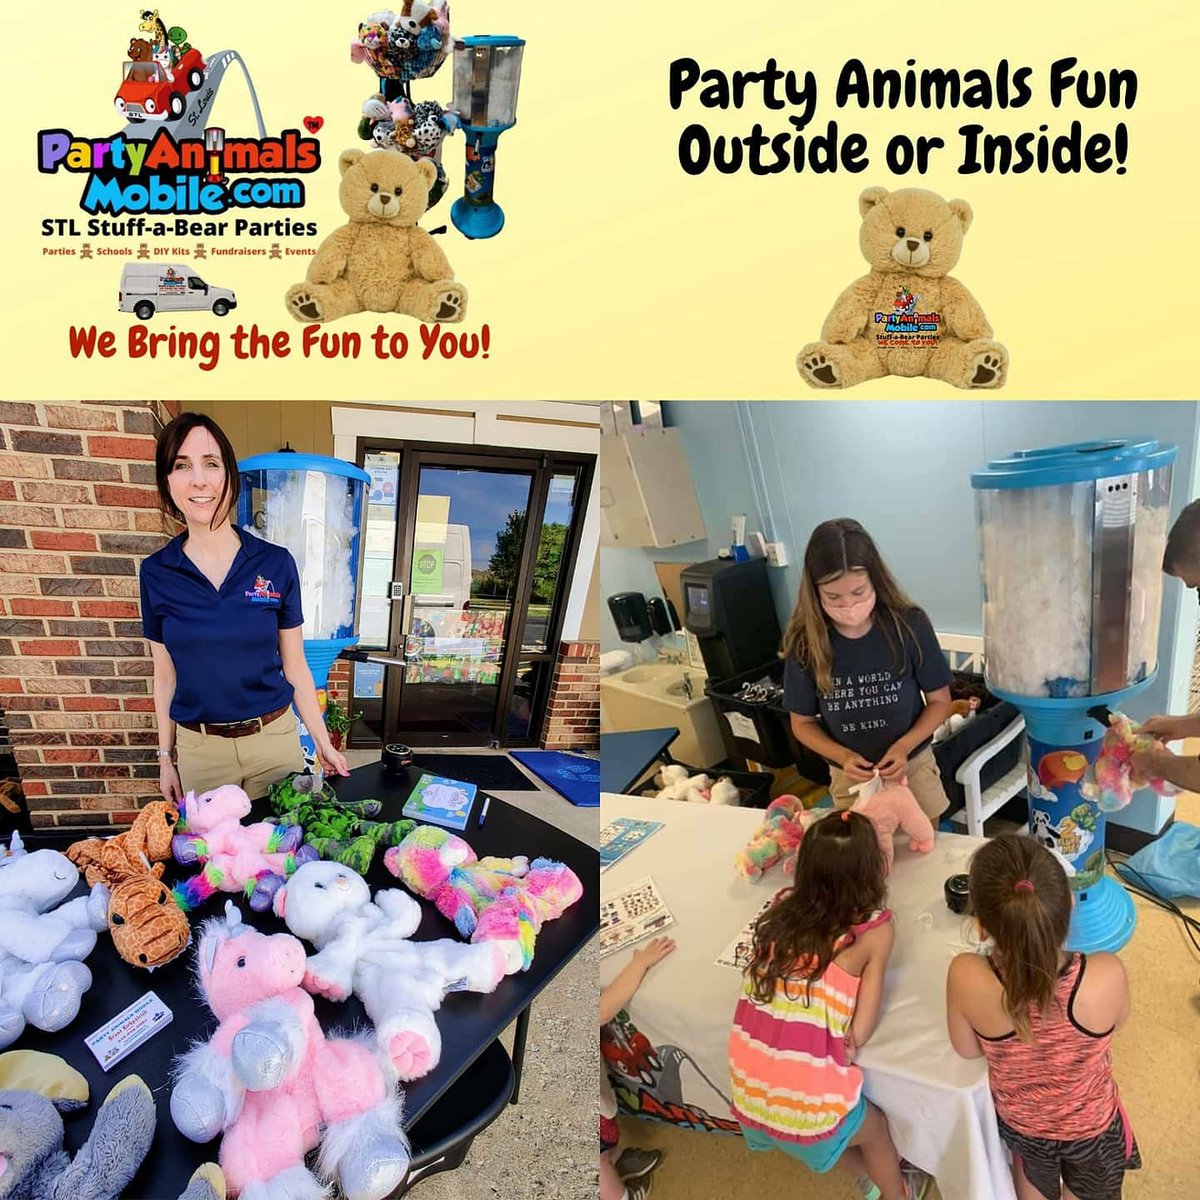 Masked Ways to get a #PartyAnimalsMobile Stuff-a-Bear🧸 Party or Visit! We come to you!  Contact Free DIY Kits also available with free local delivery!

#afftonmo #crestwoodmo #sappingtonmo #lemaymo #brentwoodmo #claytonmo #sunsethillsmo #richmondheightsmo #southcitylivin #STL